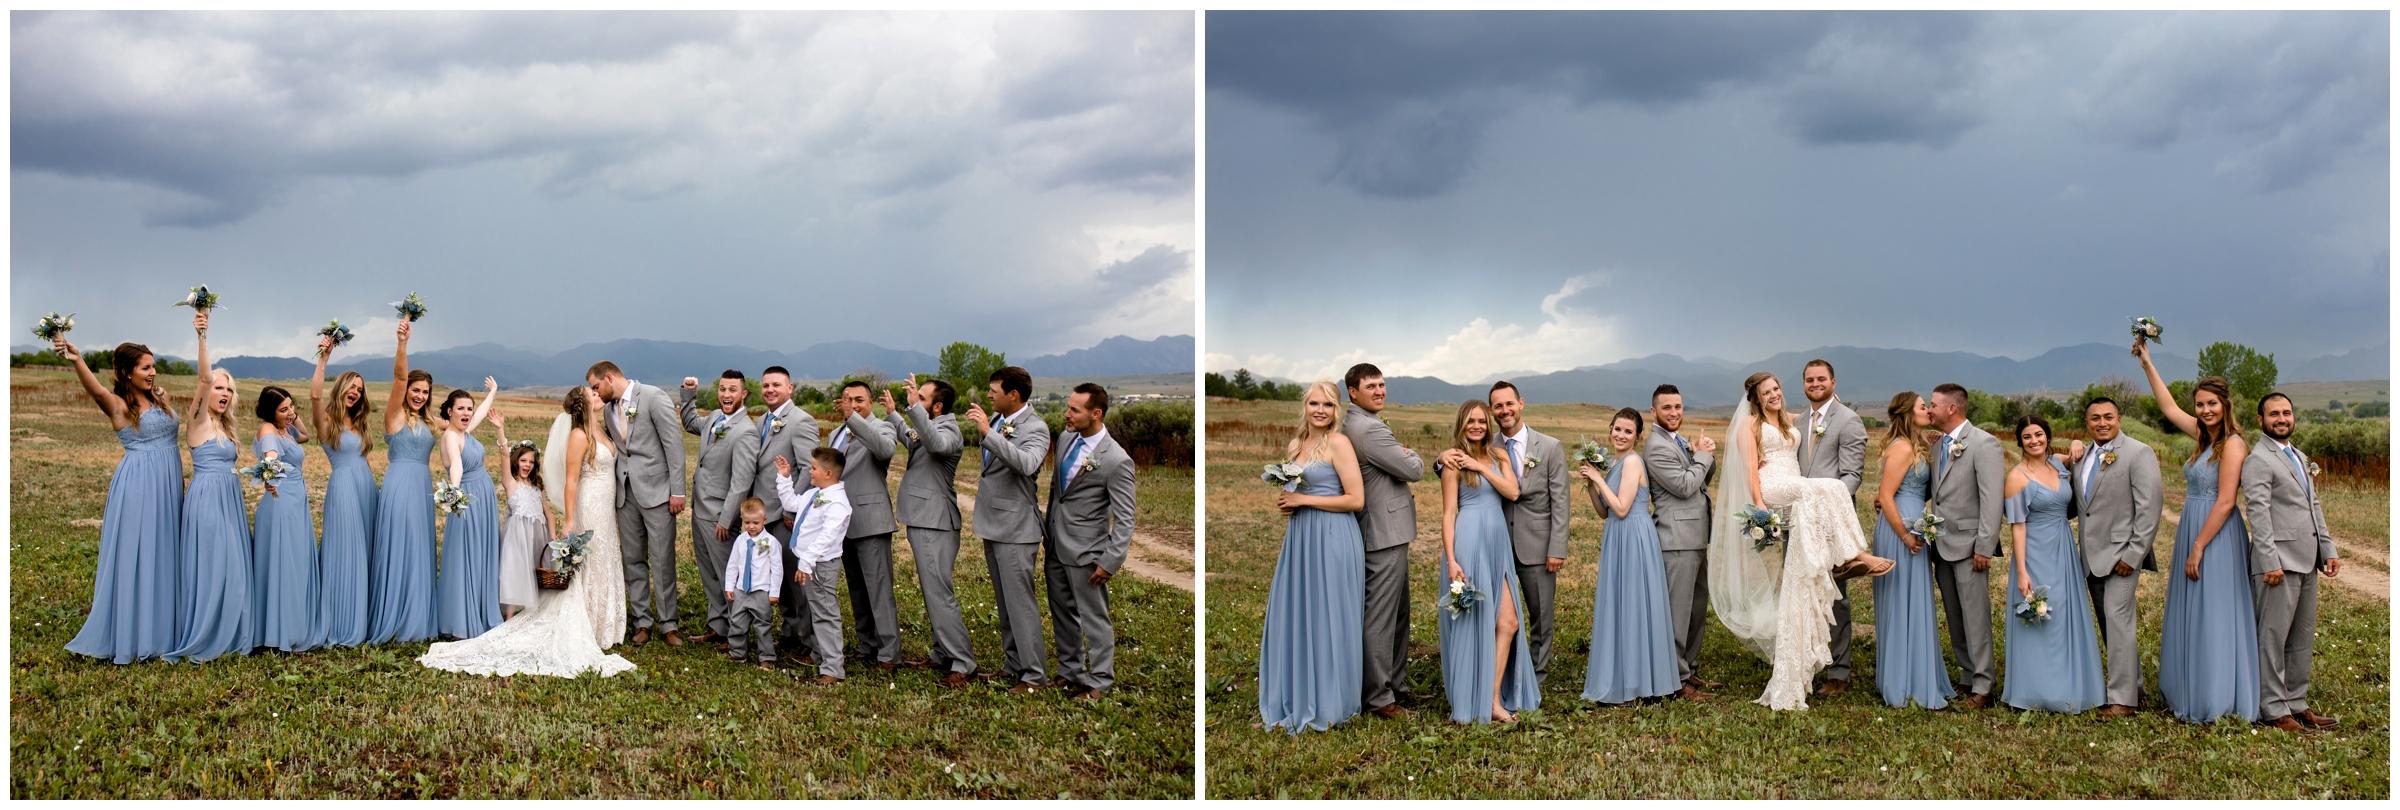 wedding party in gray and light blue posing in front of mountains at Colorado summer wedding 